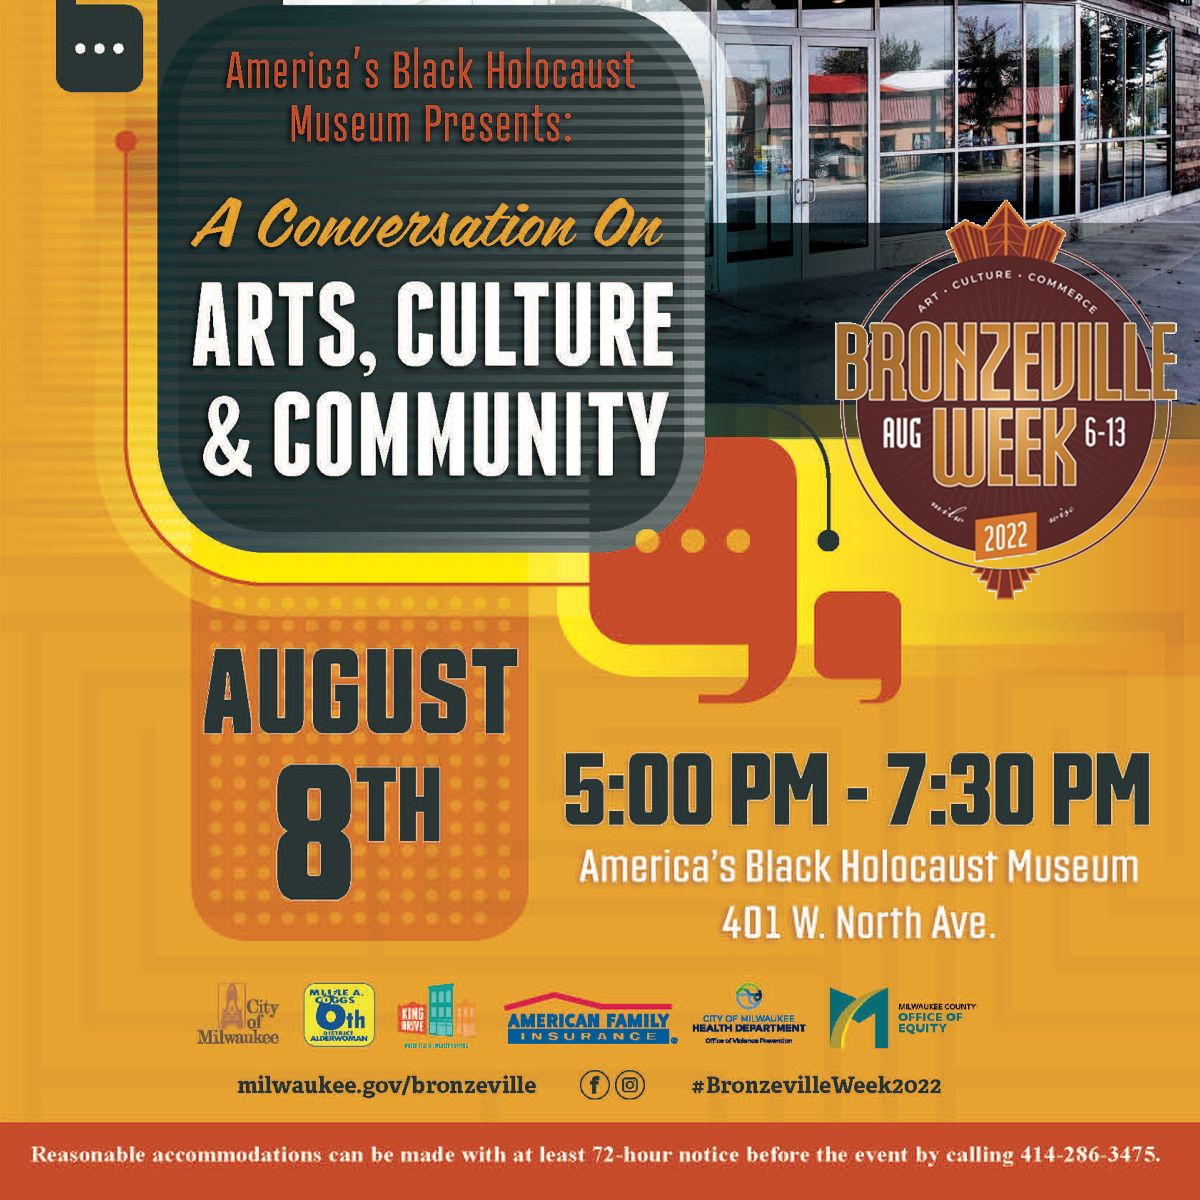 Join Us for Bronzeville Week America's Black Holocaust Museum